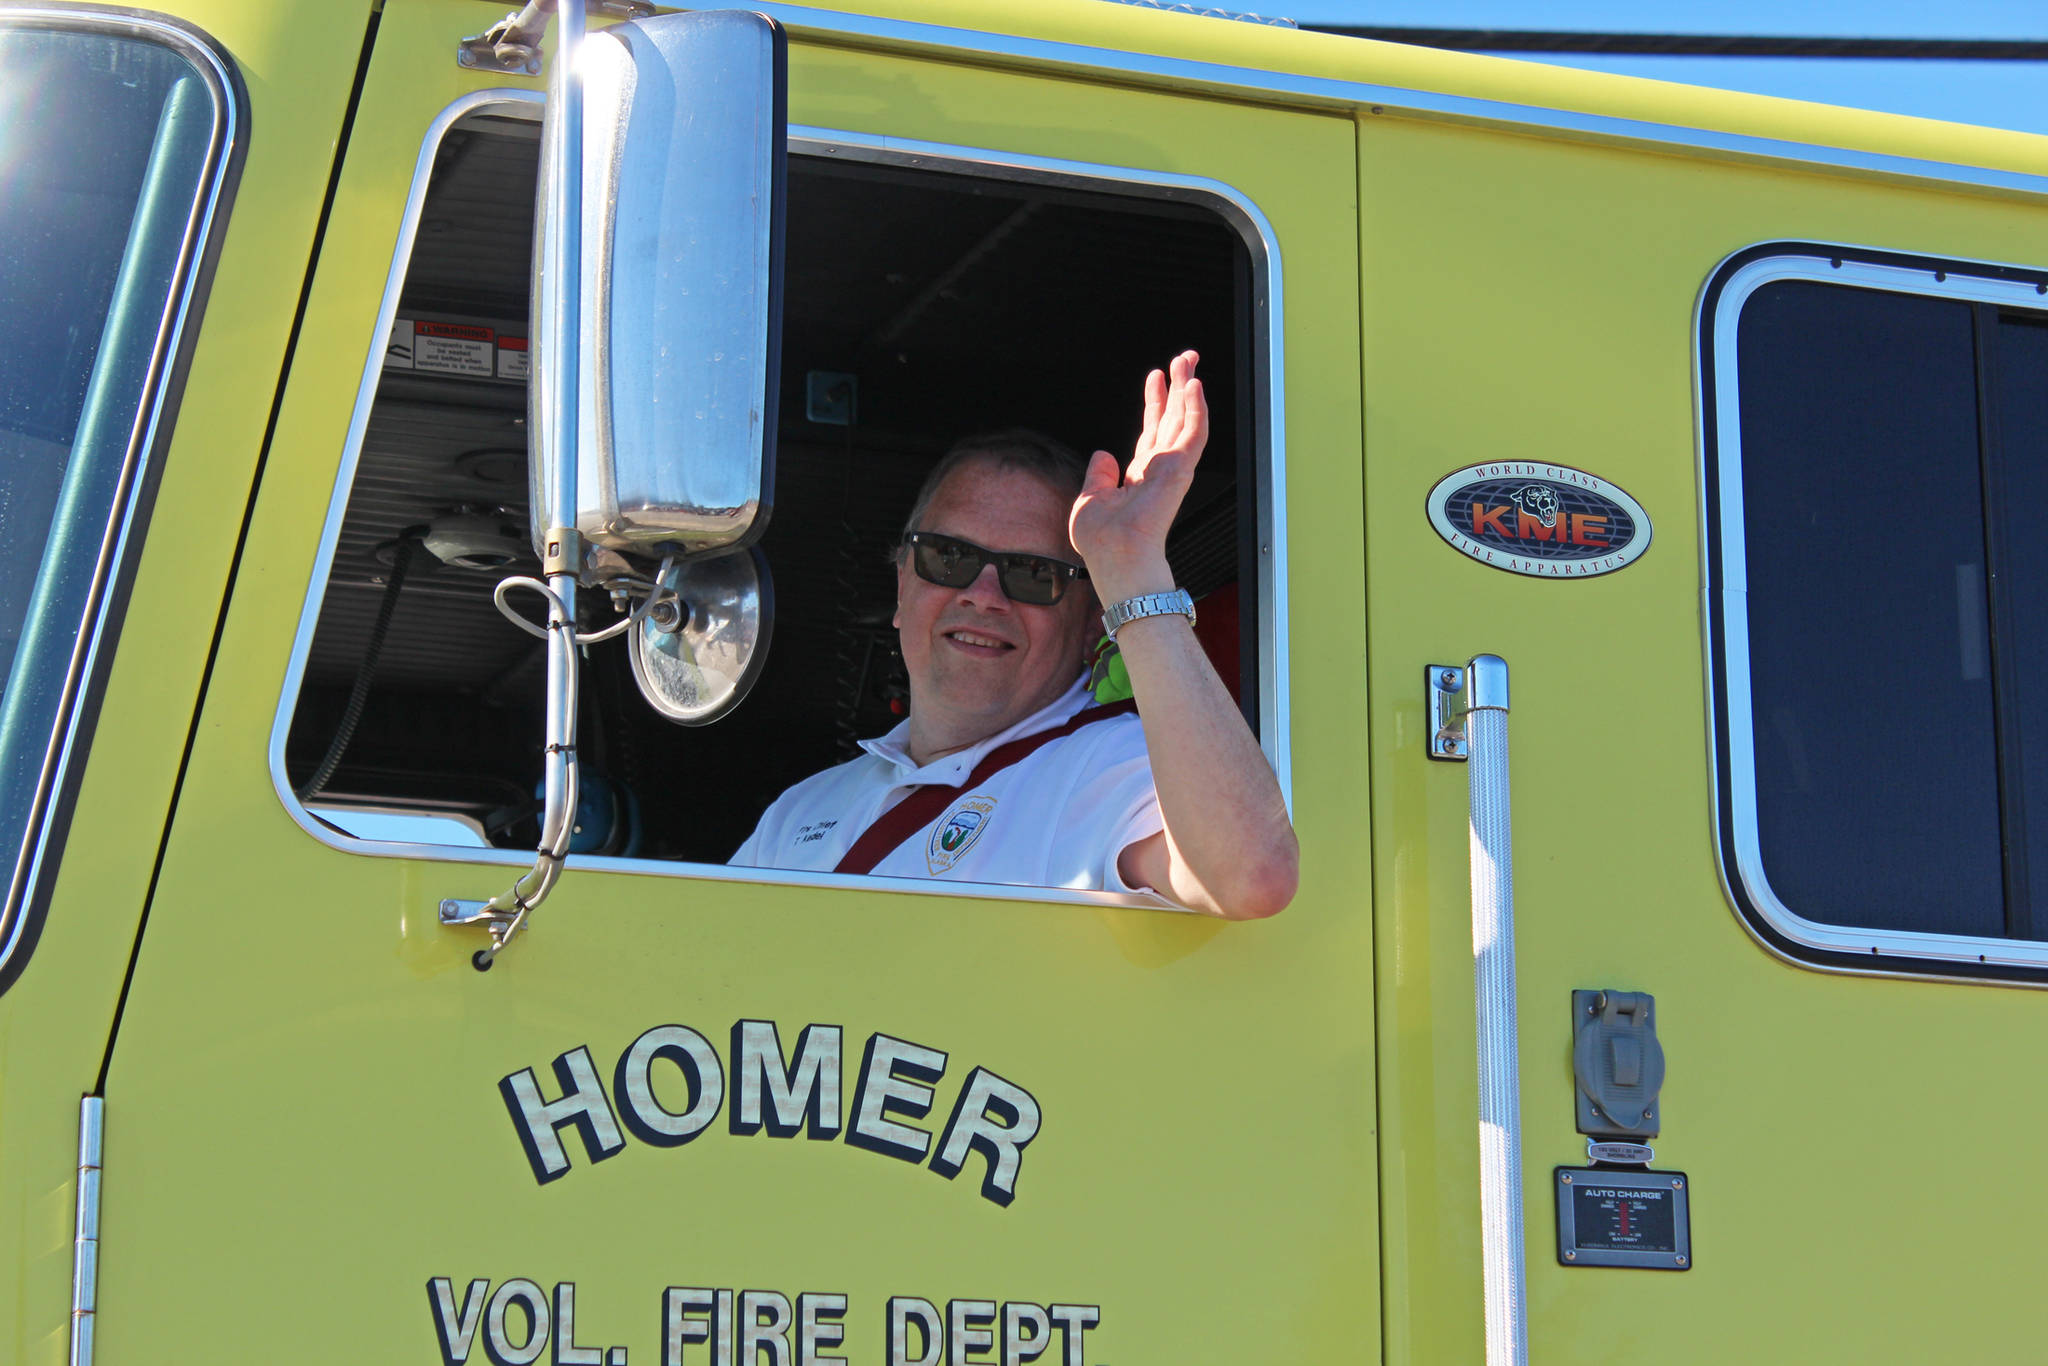 Homer Volunteer Fire Department Chief Terry Kadel waves to the crowd gathered on Pioneer Avenue during this year’s Independence Day parade Wednesday, July 4, 2018 in Homer, Alaska. (Photo by Megan Pacer/Homer News)